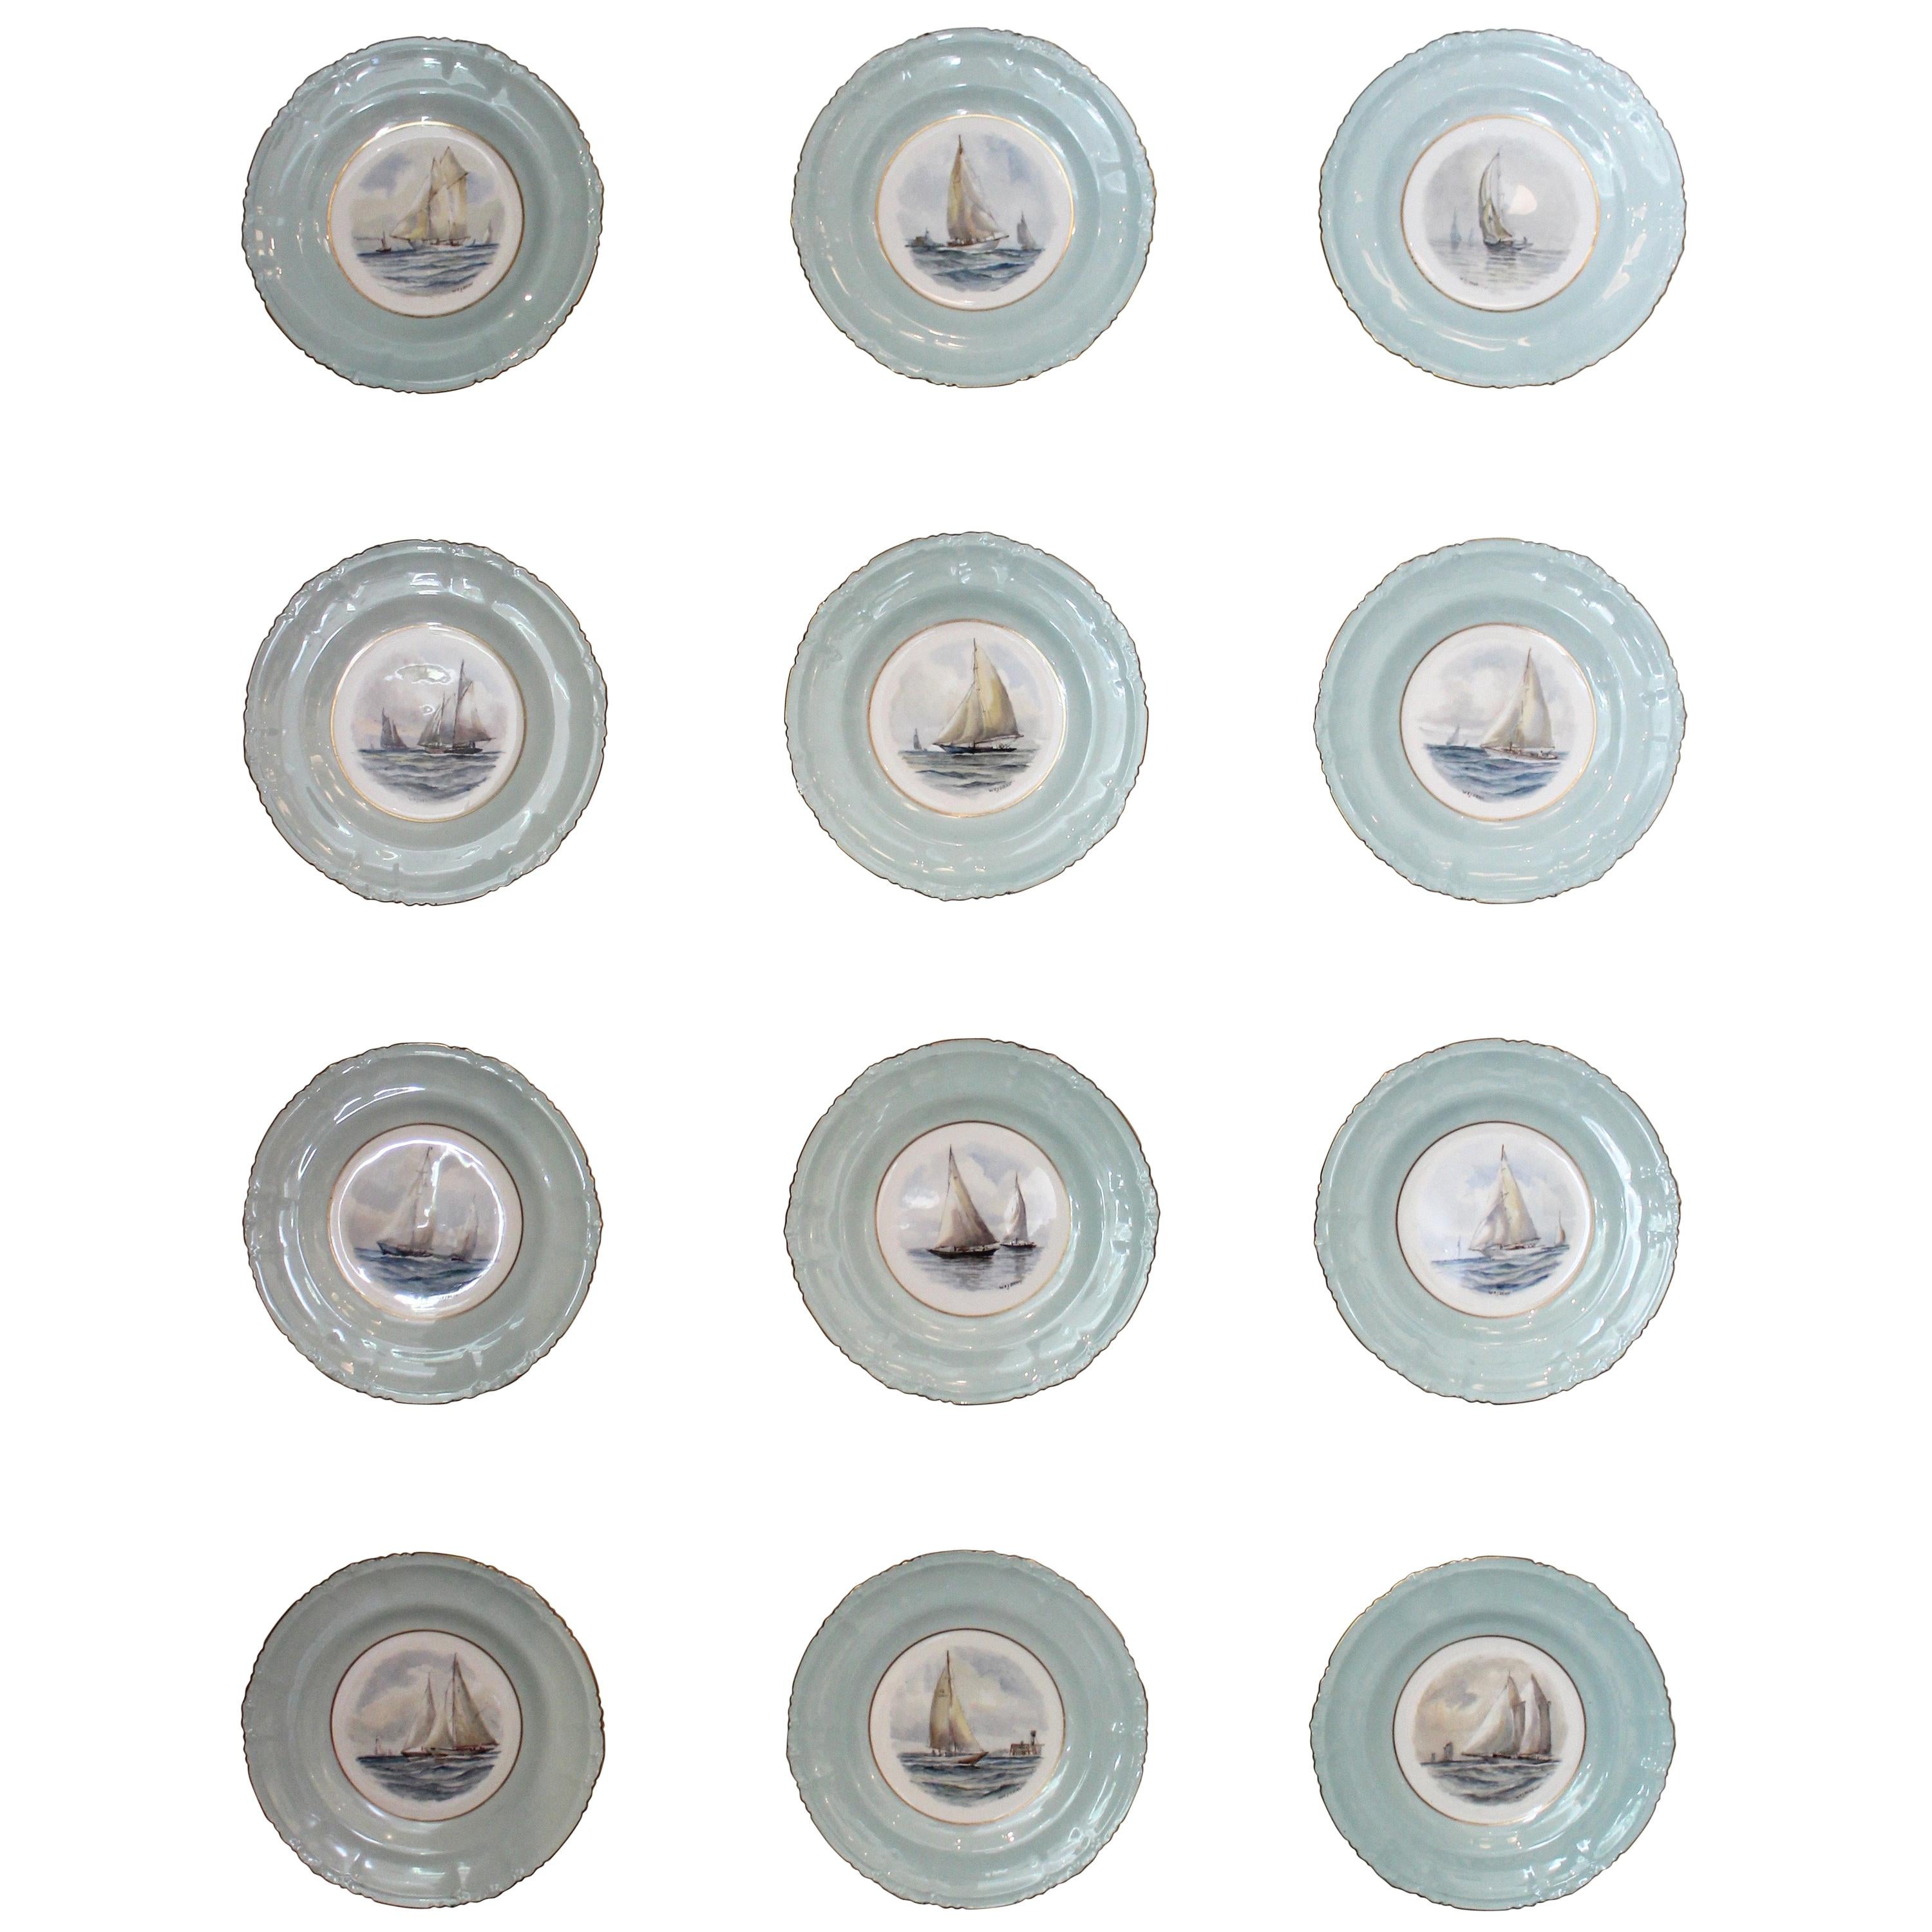 Set of 12 Royal Crown Derby Porcelain Plates with Yachting Scenes